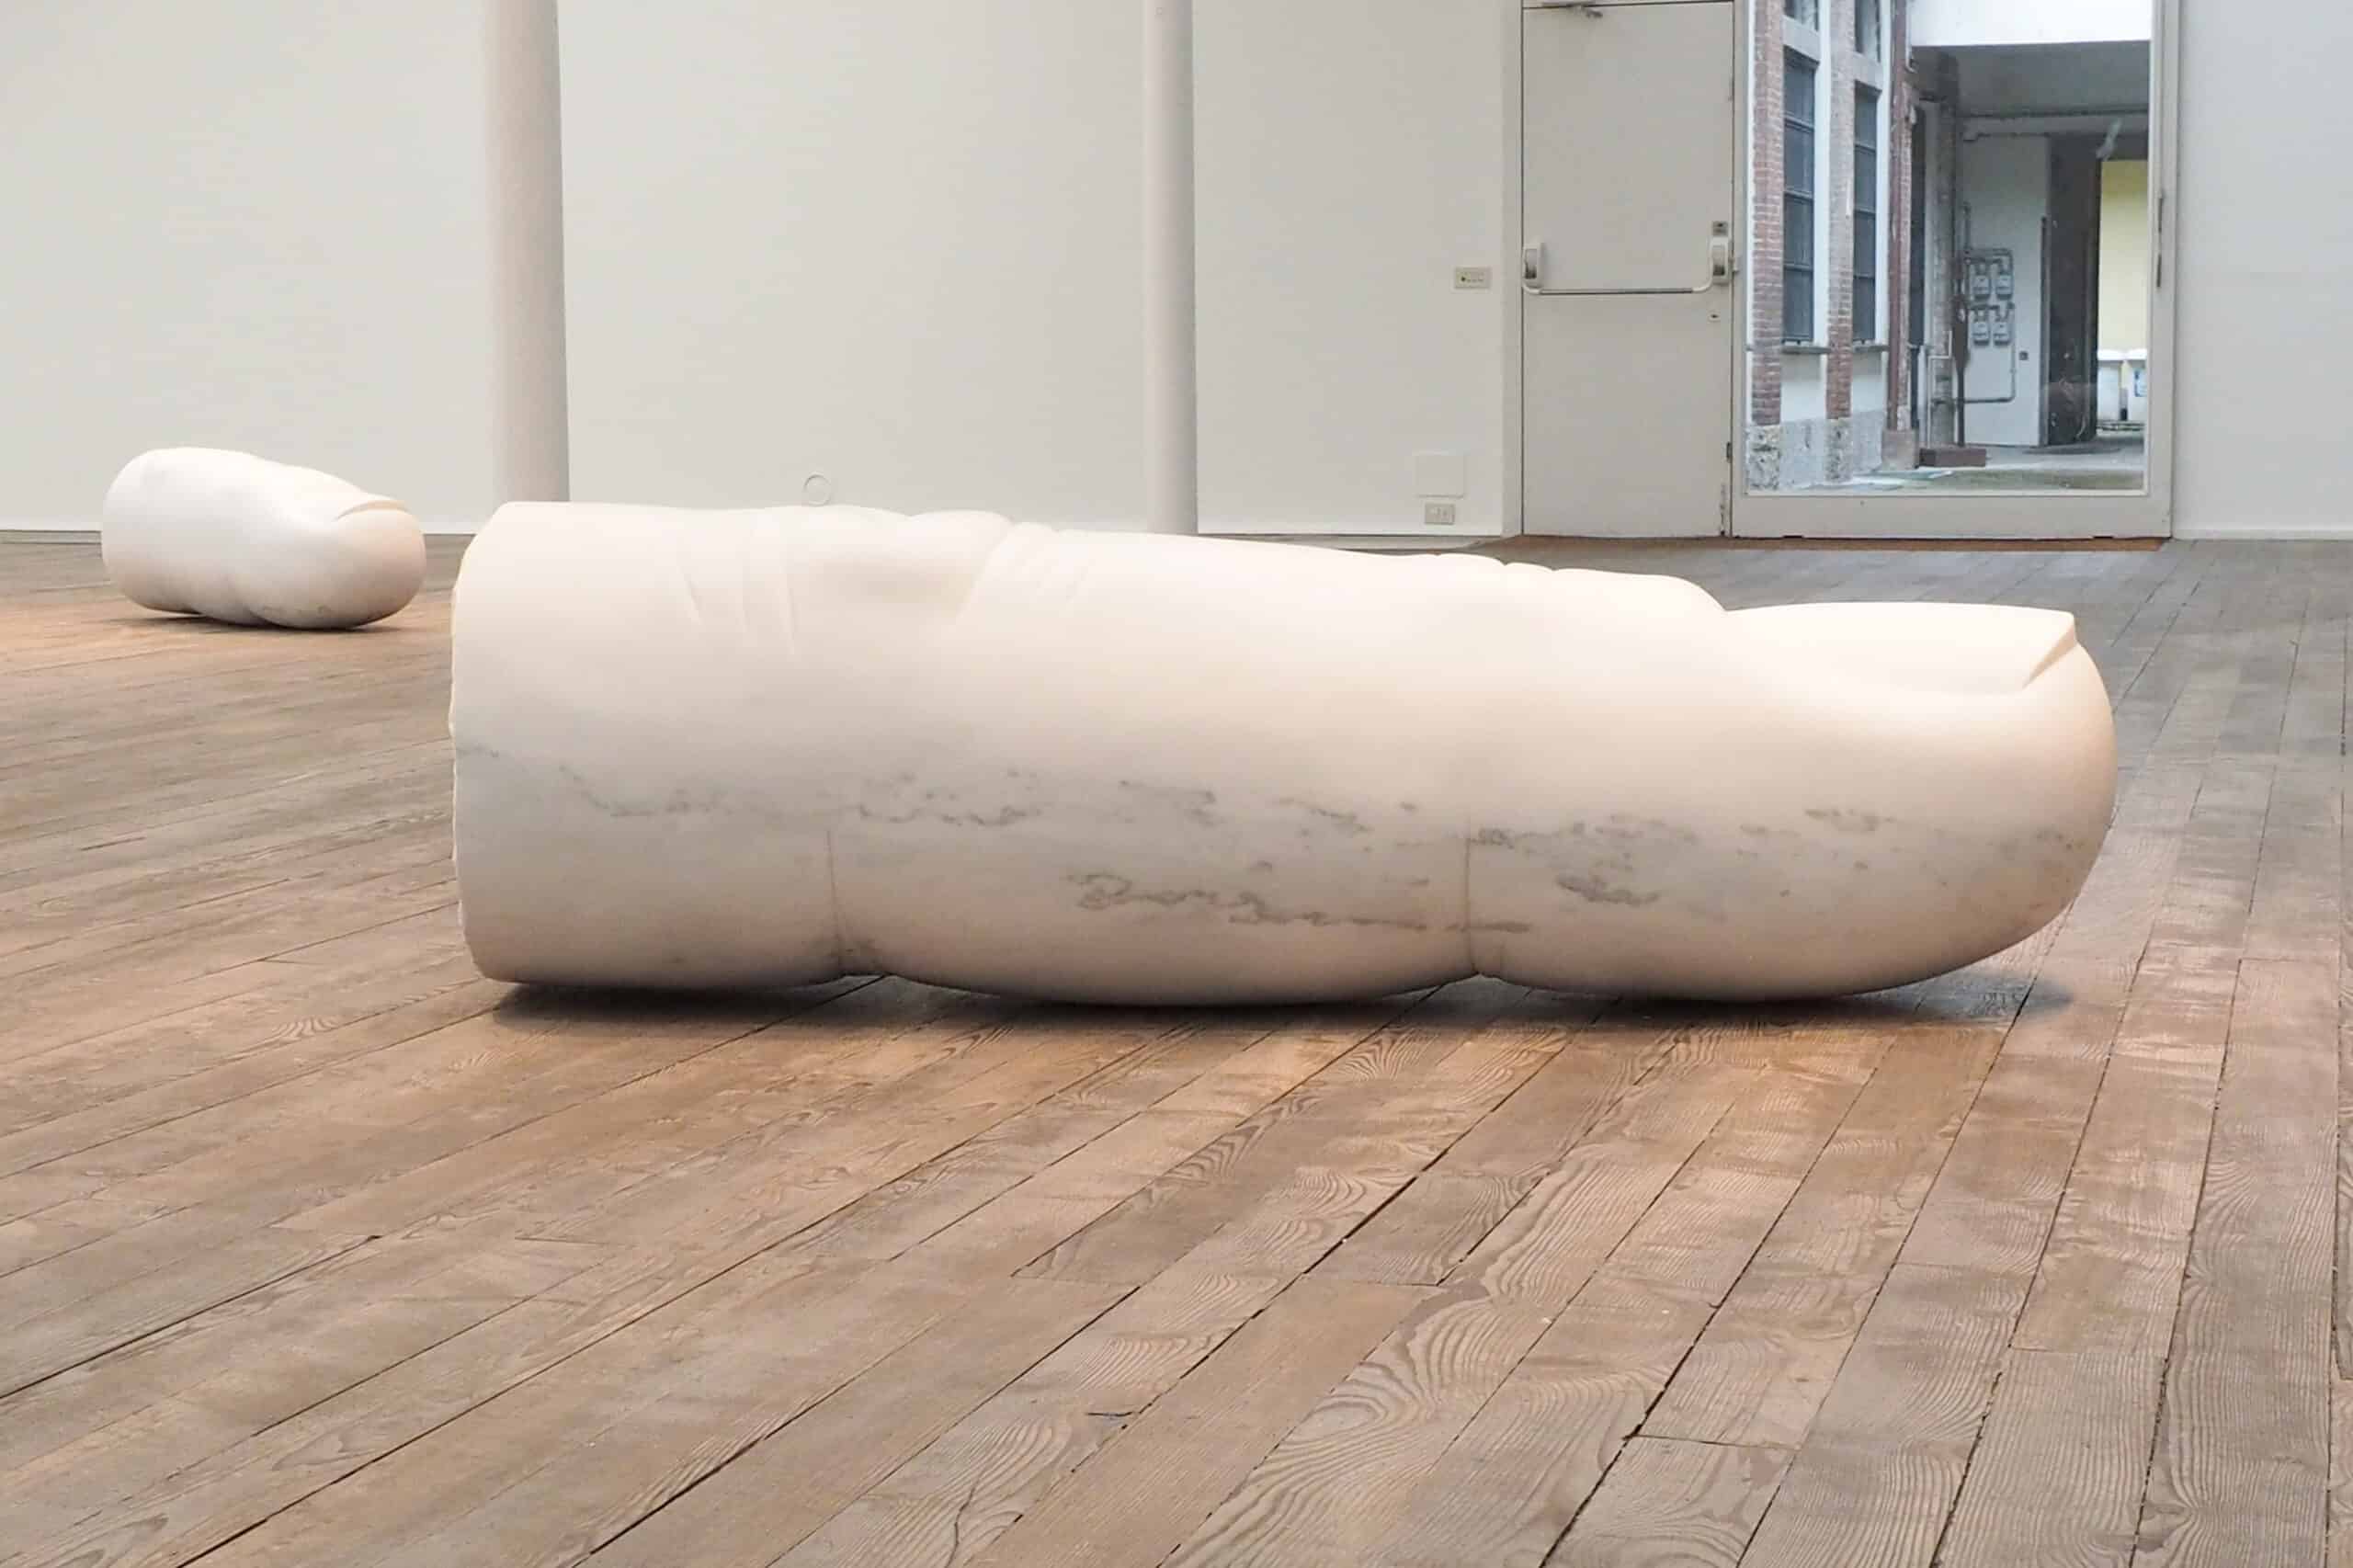 JONATHAN MONK | F. I. N. G. E. R. S. (I, II, III), 2015 | White Carrara marble (Bianco P) | Exhibition View